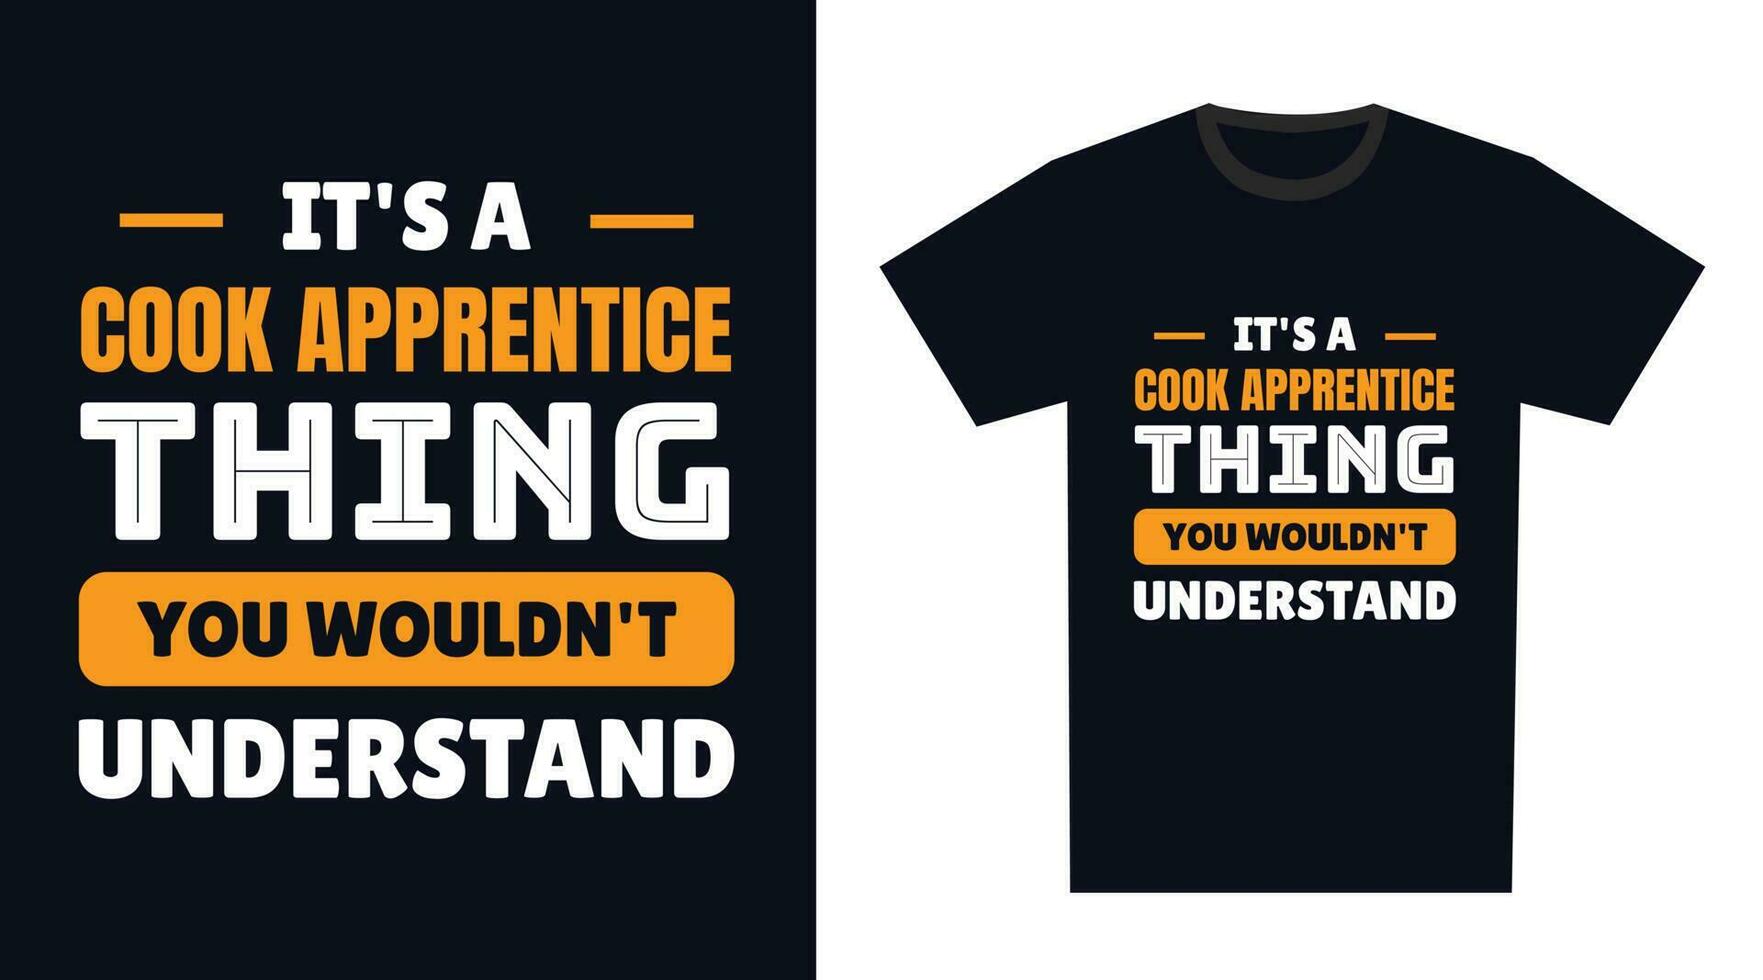 Cook Apprentice T Shirt Design. It's a Cook Apprentice Thing, You Wouldn't Understand vector